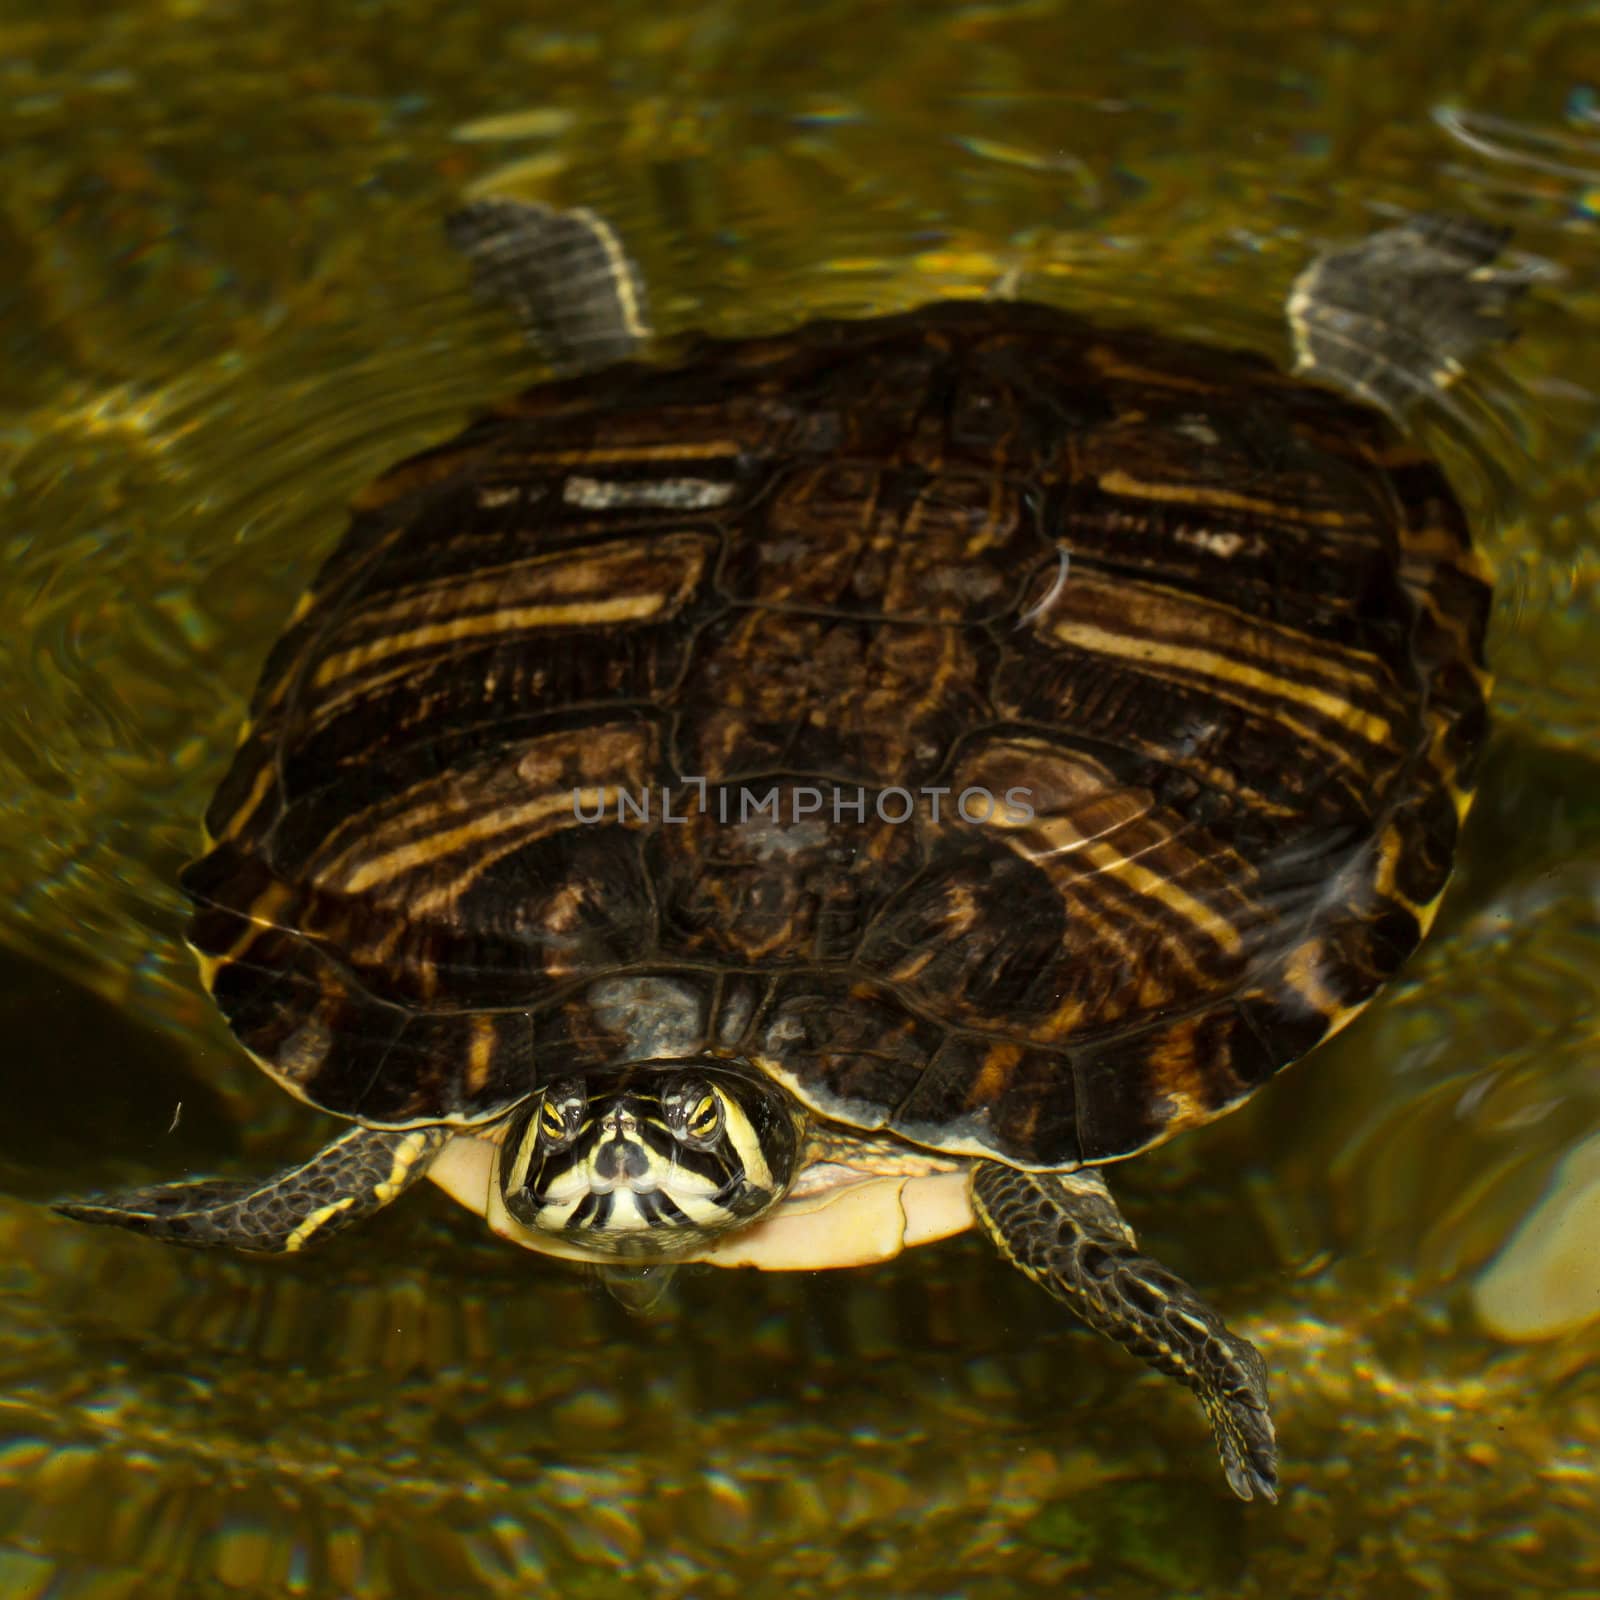 A European pond terrapin is swimming in a pond